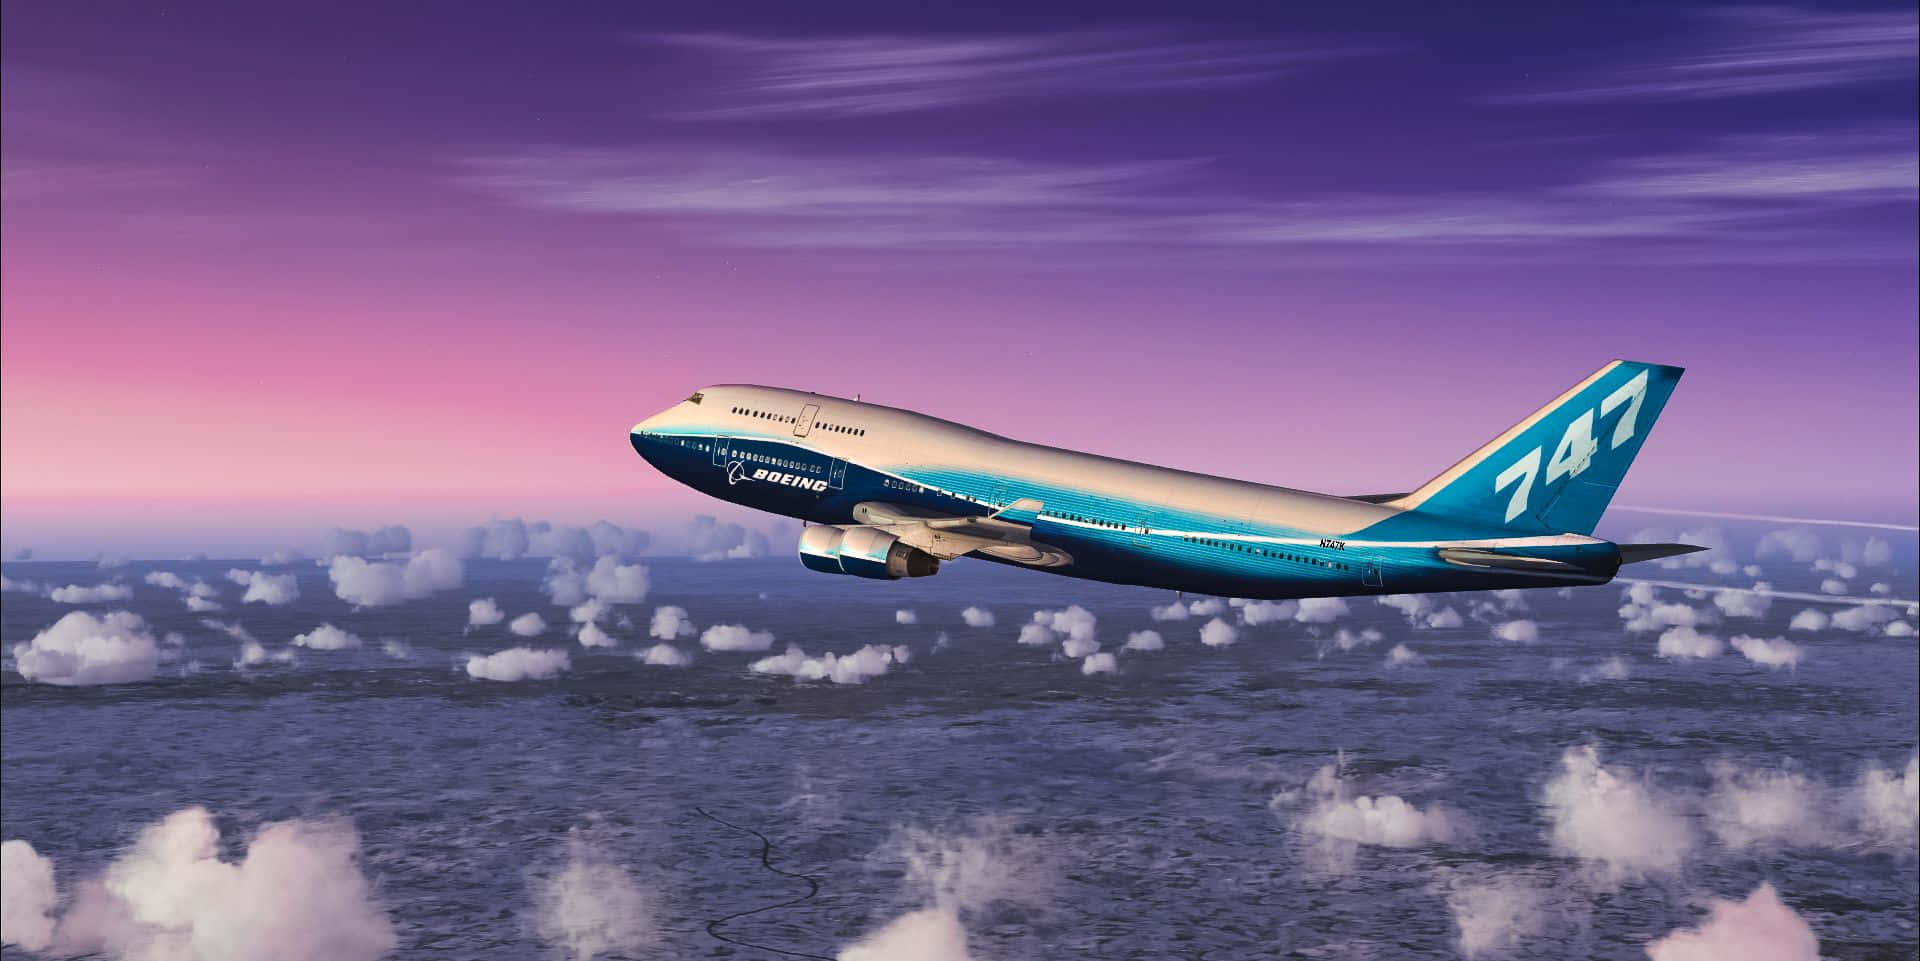 747 Airplane Over Skies Background